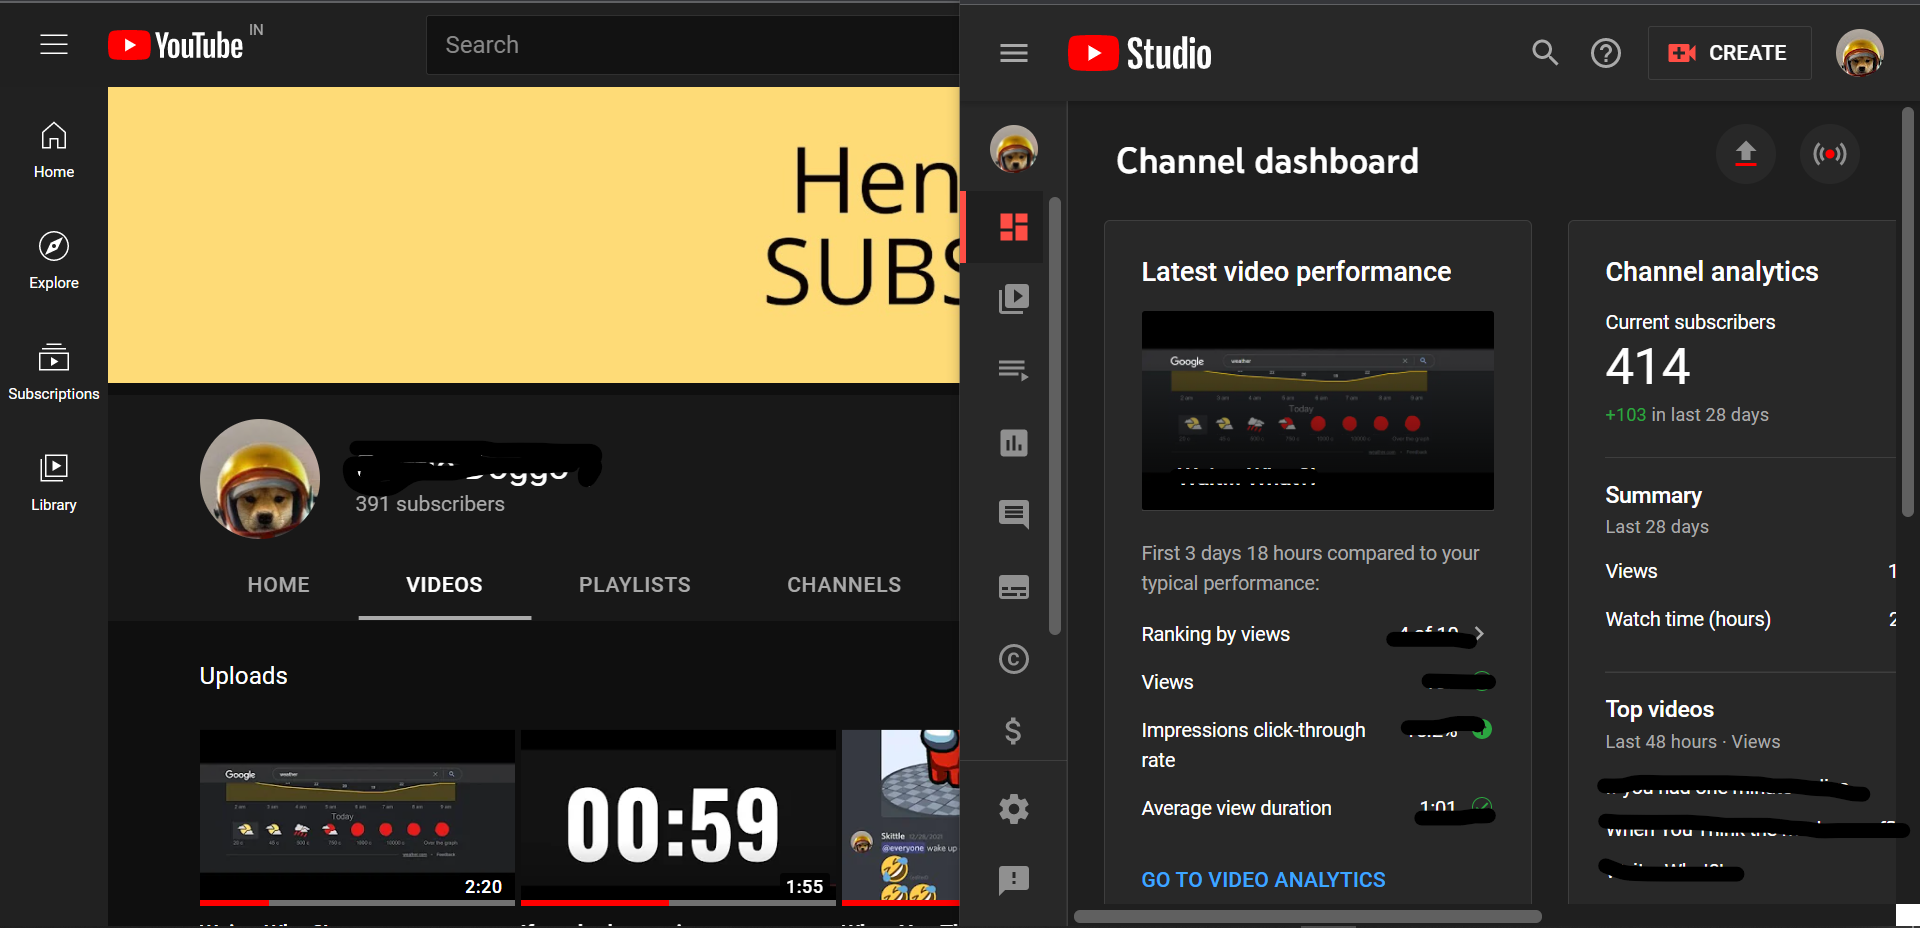 Why Does  Studio Show Different View Counts